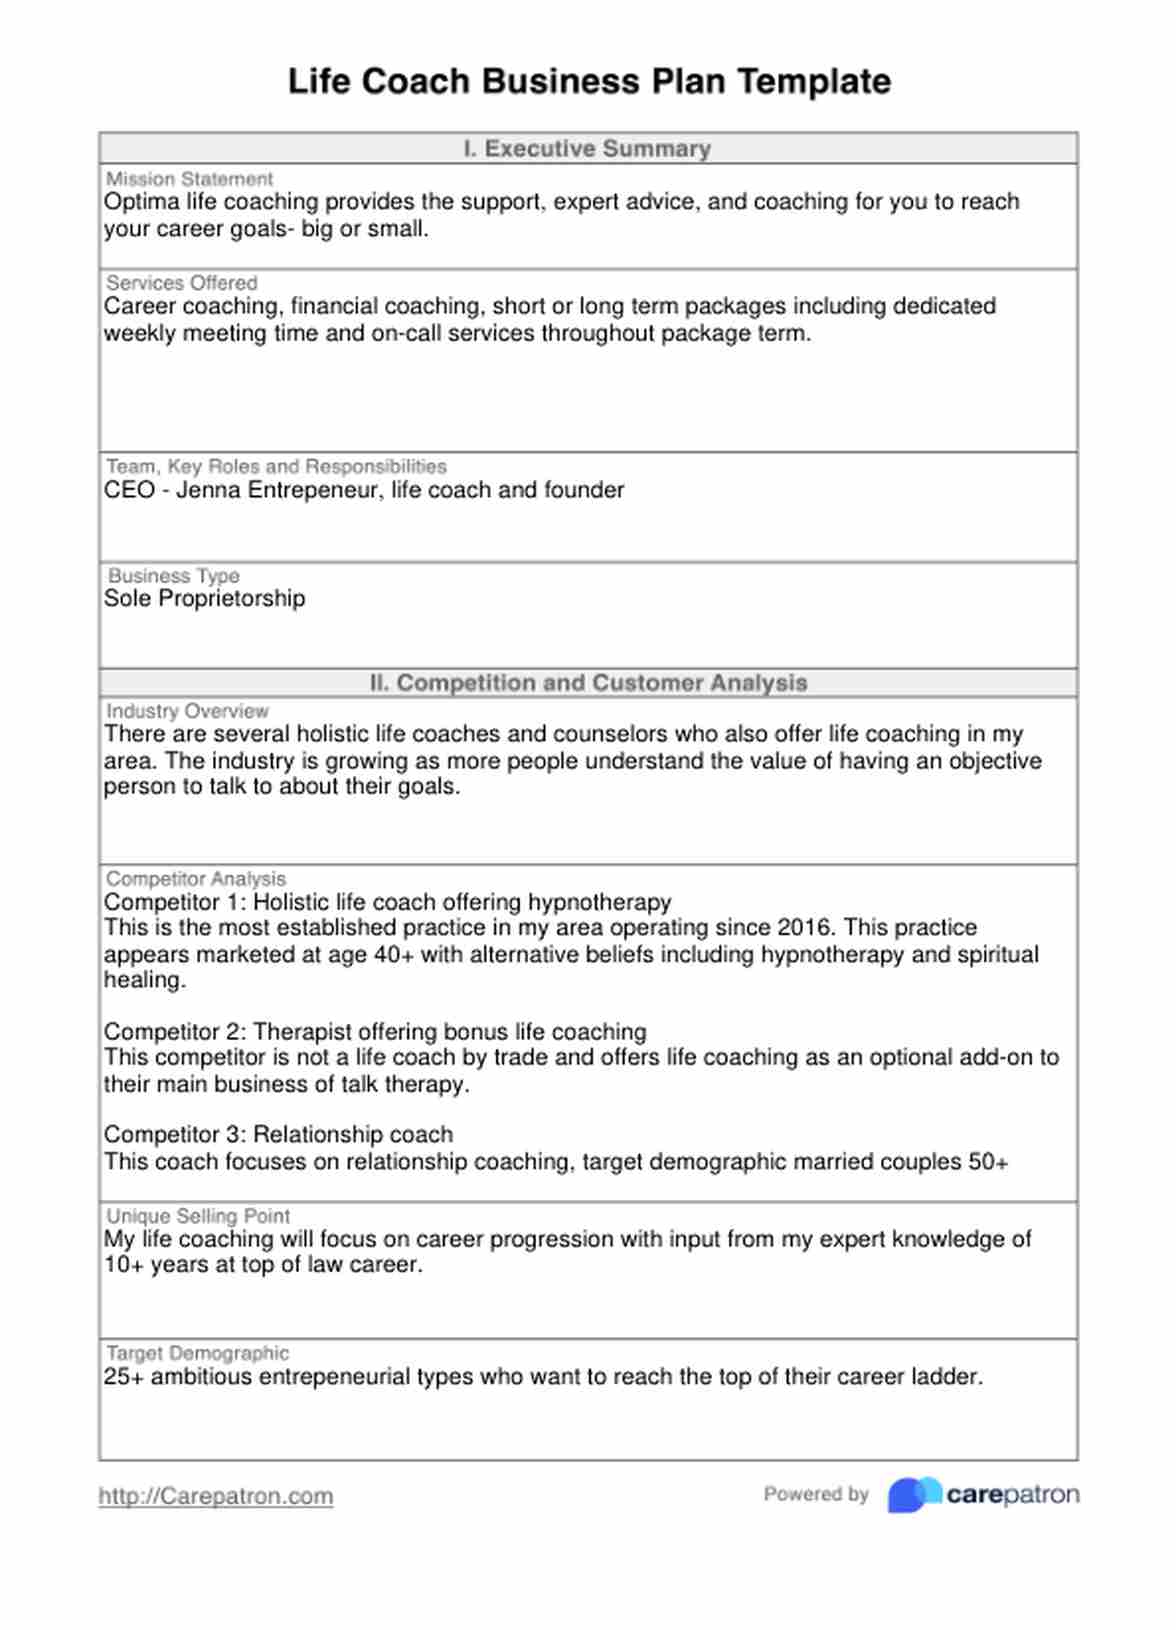 Life Coach Business Plan Template PDF Example